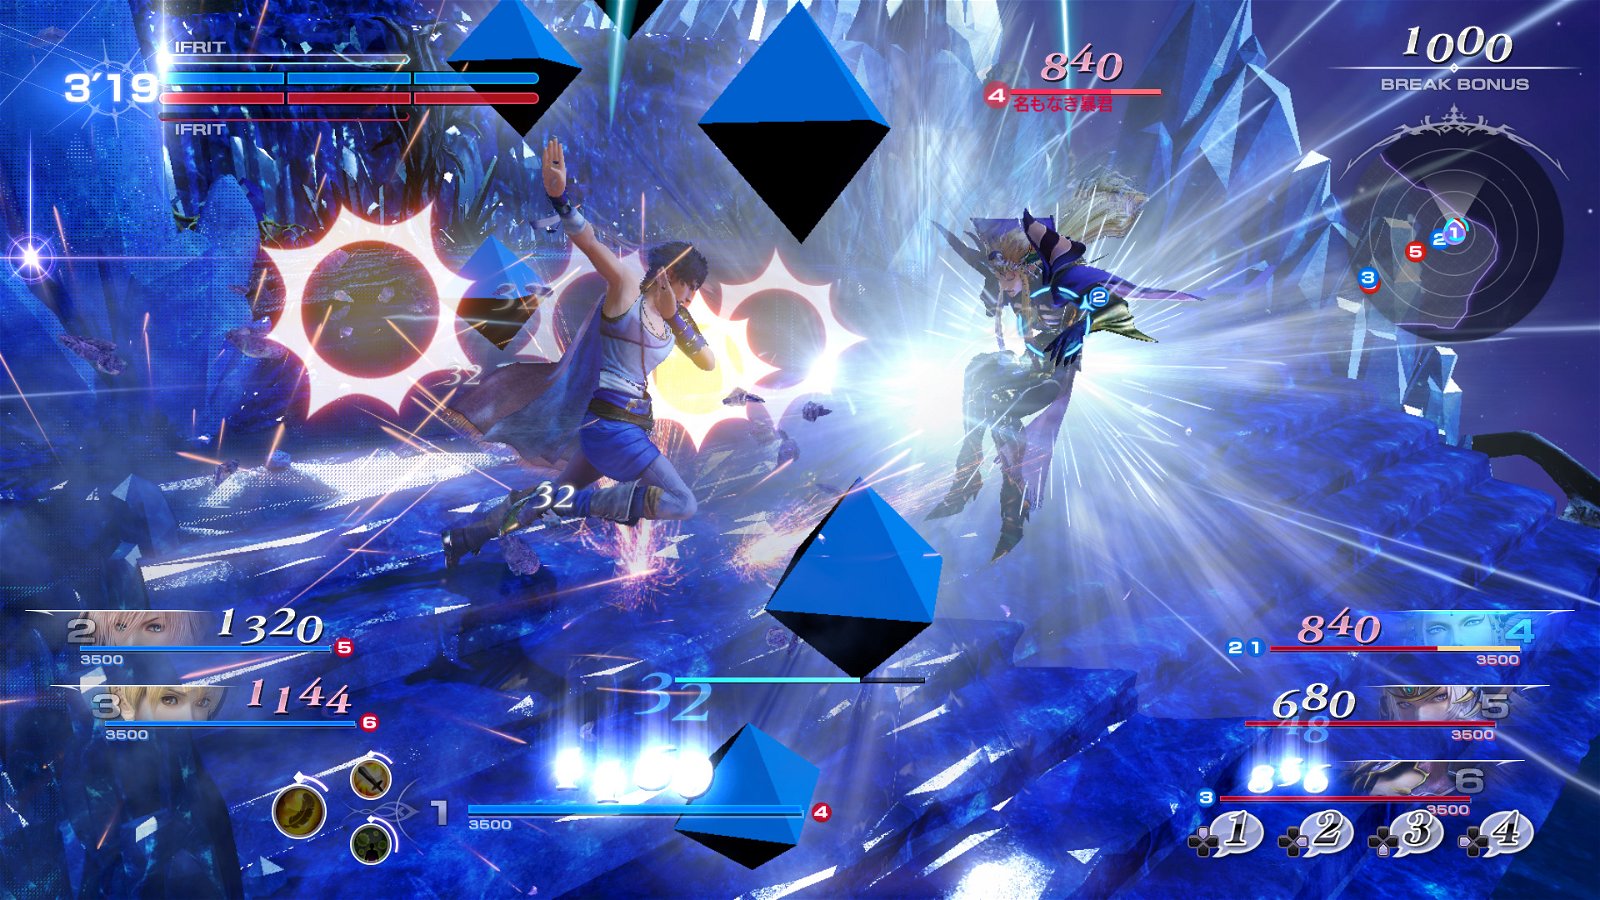 Dissidia Final Fantasy Nt (Ps4) Review: The Waiting Game 3